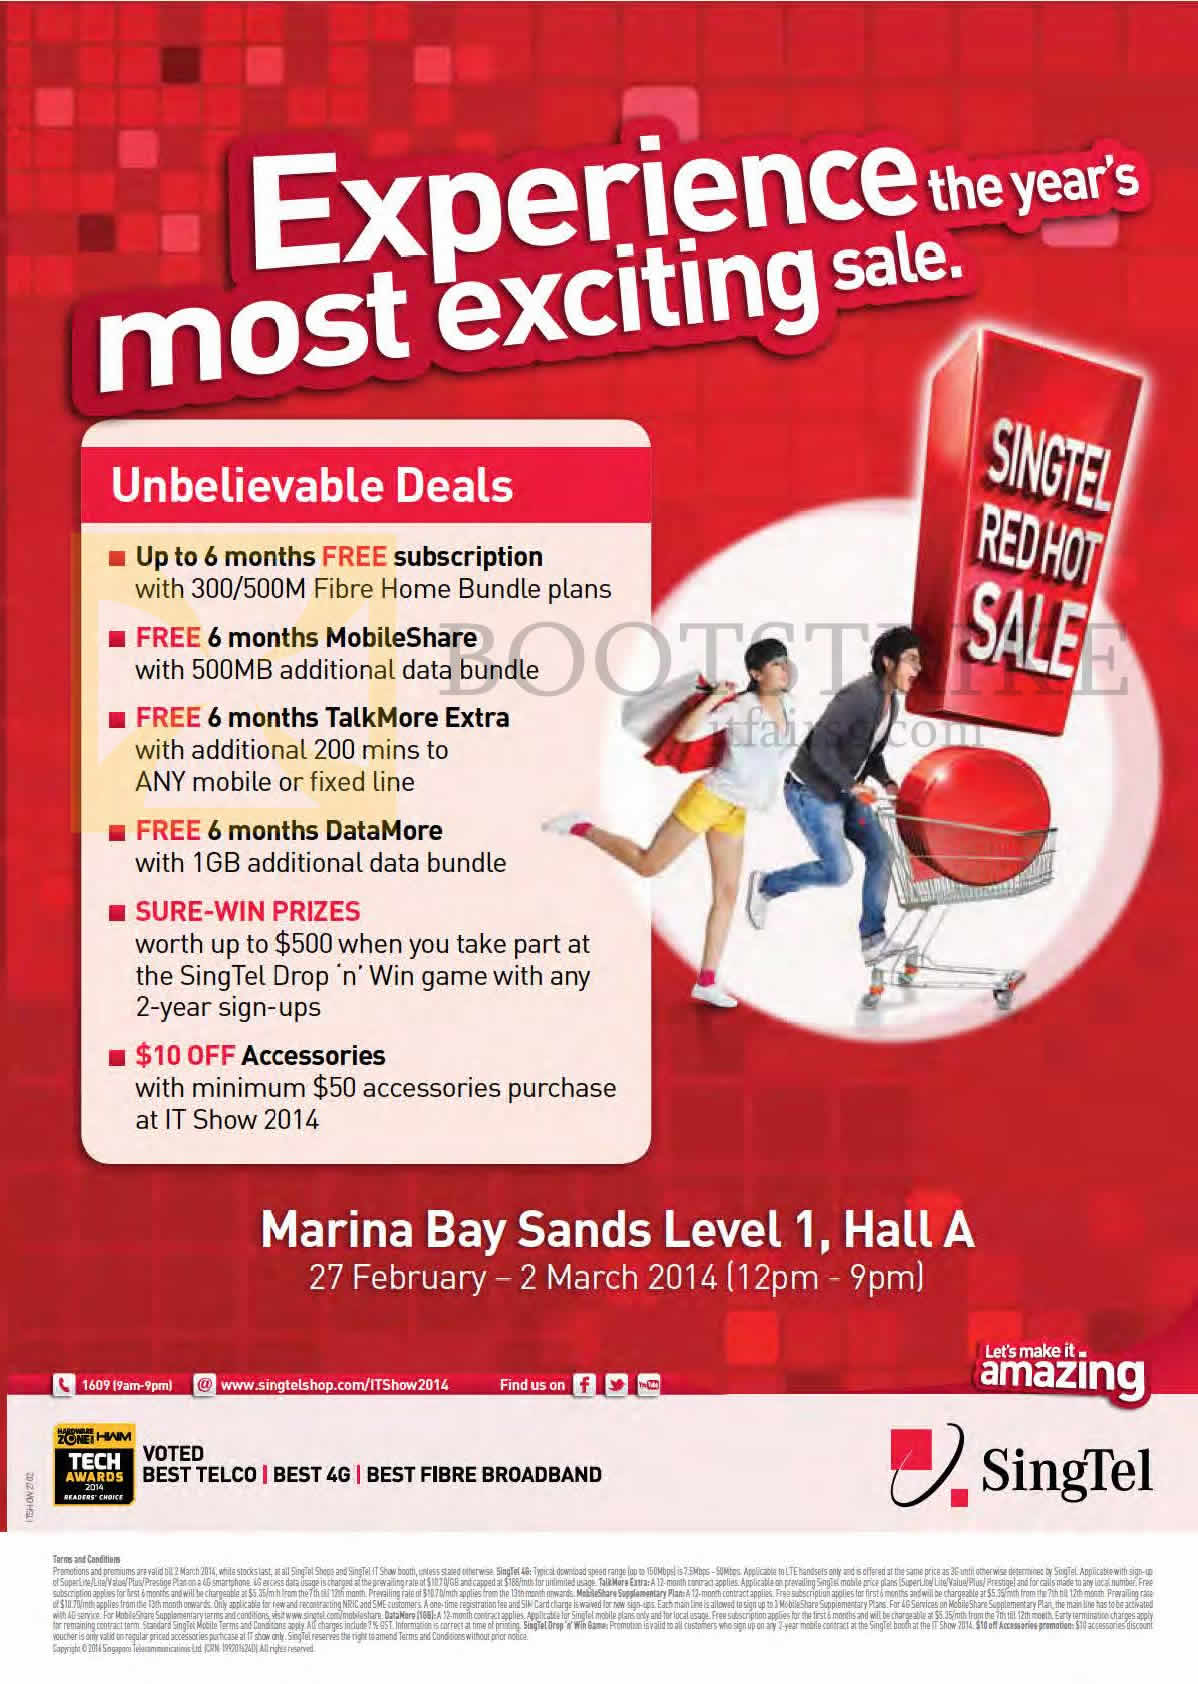 IT SHOW 2014 price list image brochure of Singtel IT SHOW Deals, Free 6 Months Mobileshare, Talkmore Extra, DataMore, Sure-Win Prizes, 10 Dollar Off Accessories